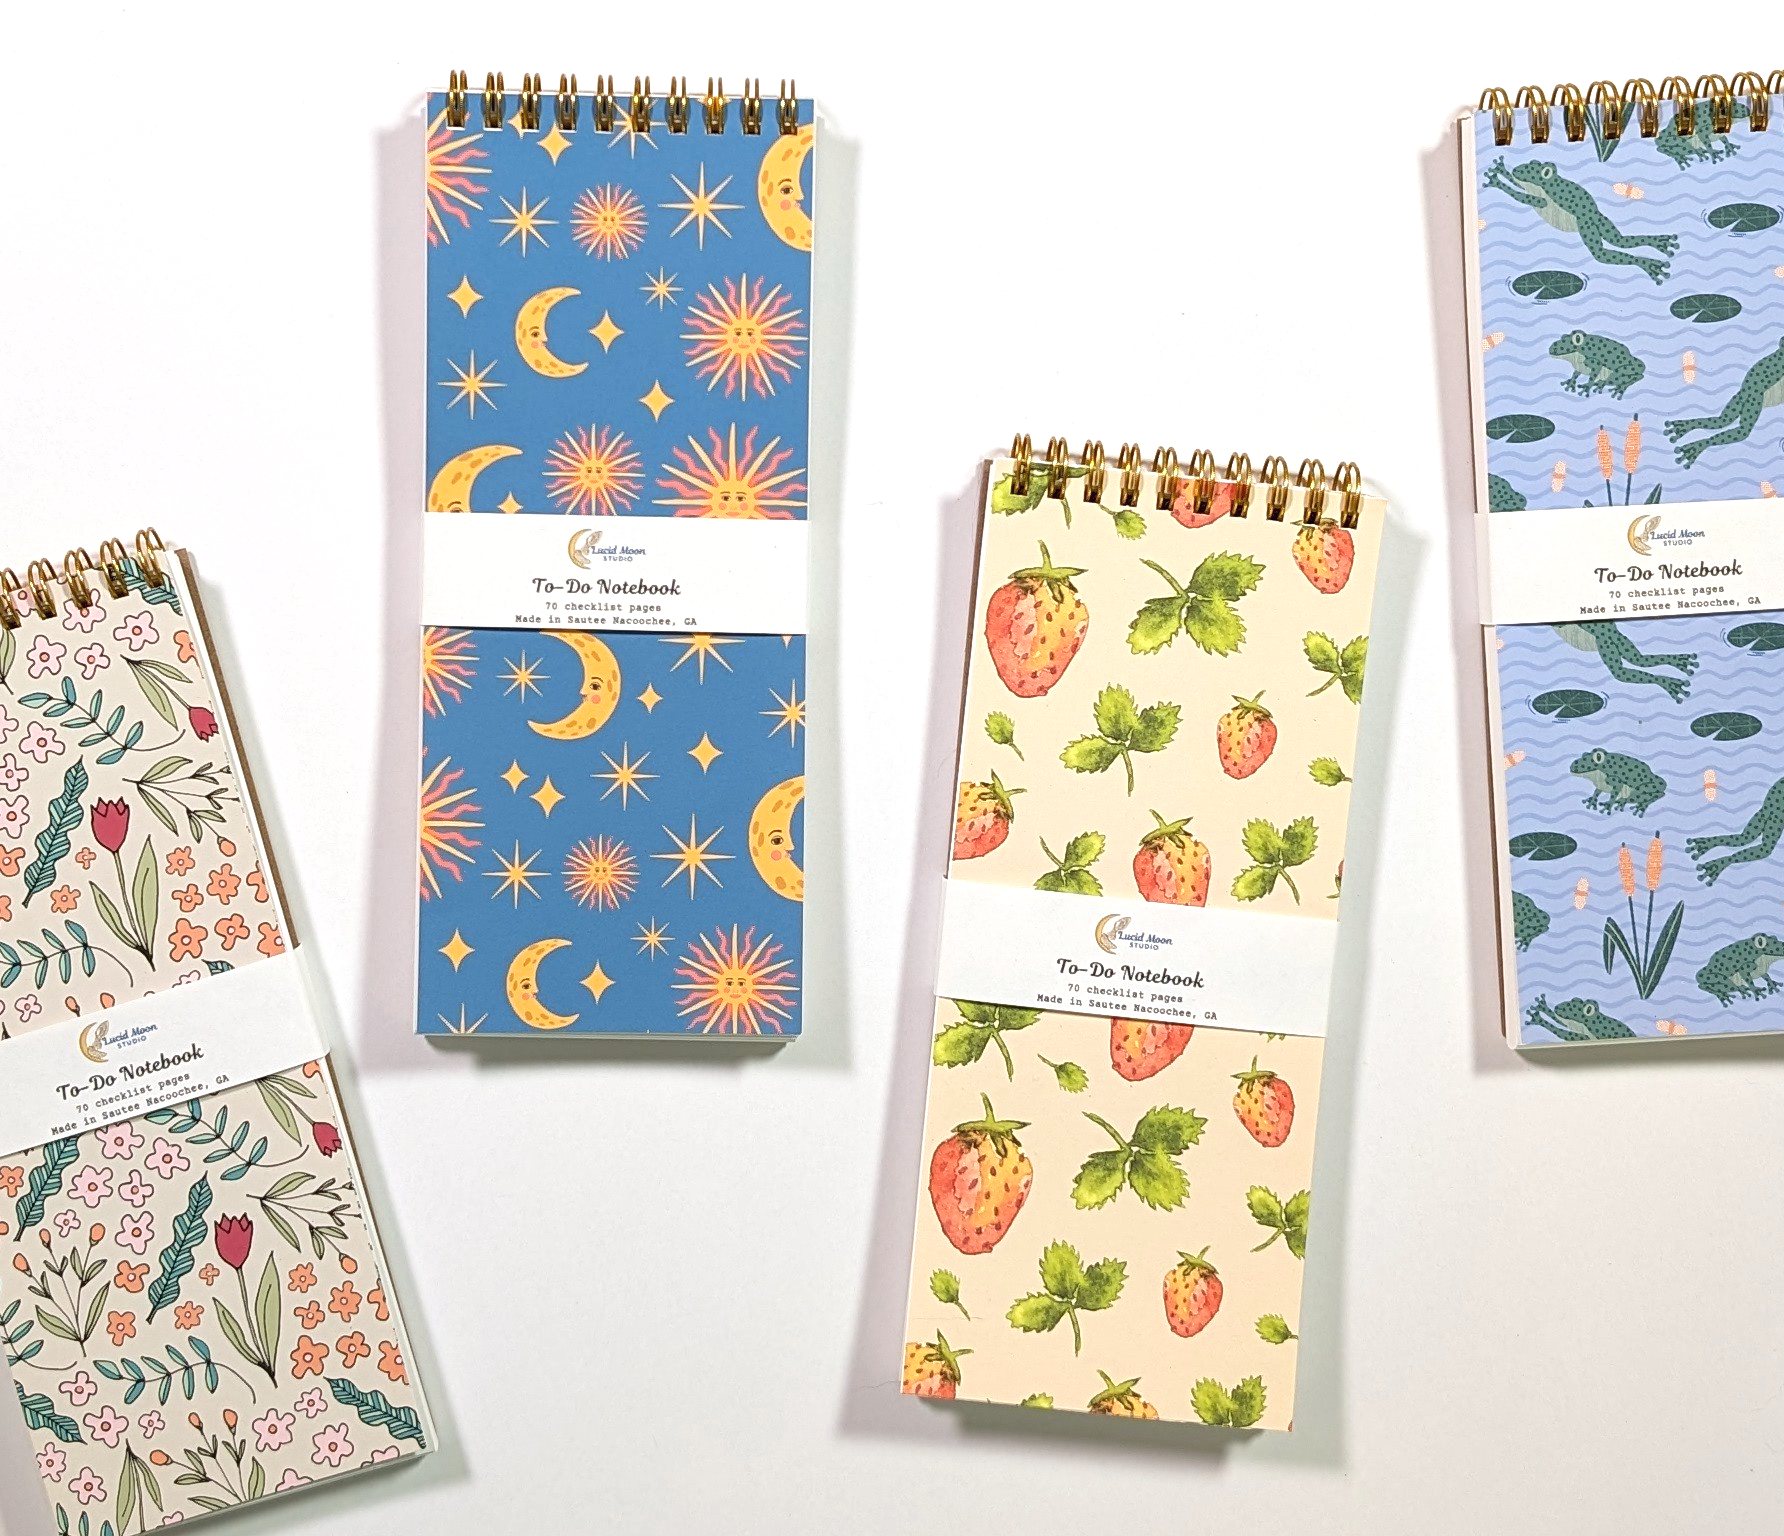 A selection of our top spiral-bound eco-friendly to-do checklist notebooks featuring hand-drawn colorful designs inspired by nature